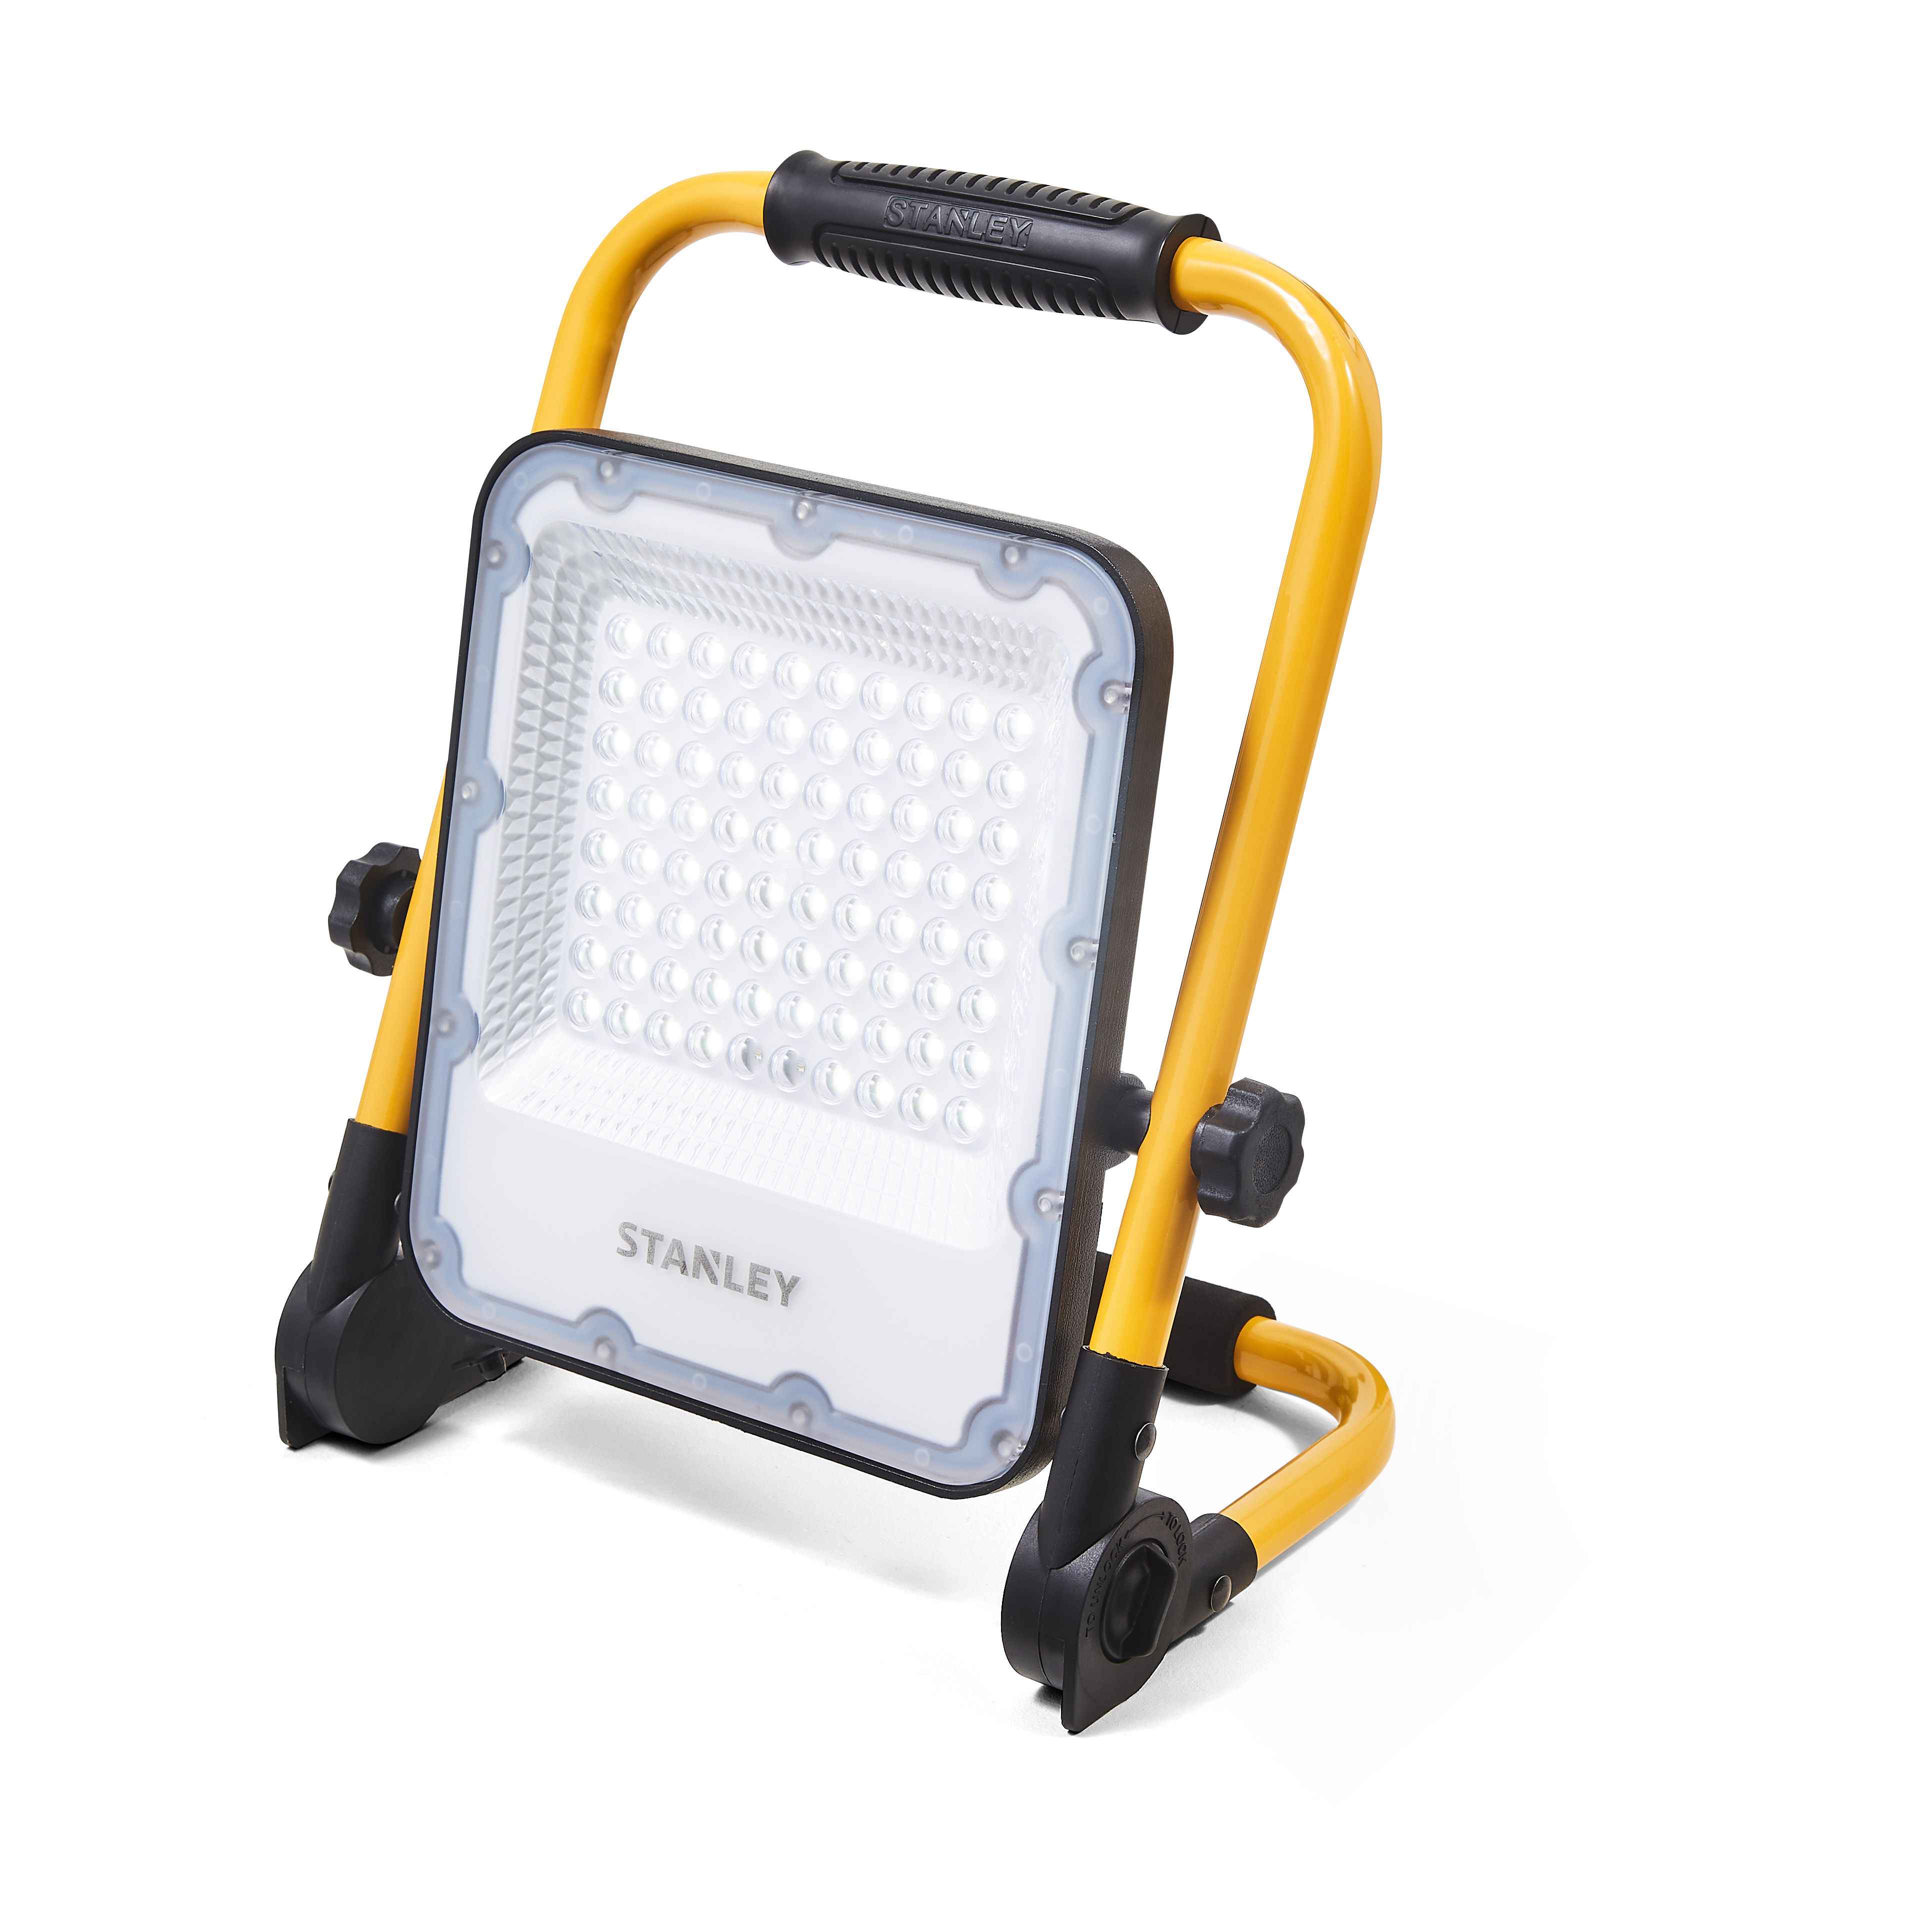 Stanley 3.7V 50W Cordless Integrated LED Rechargeable Work light, 7500lm